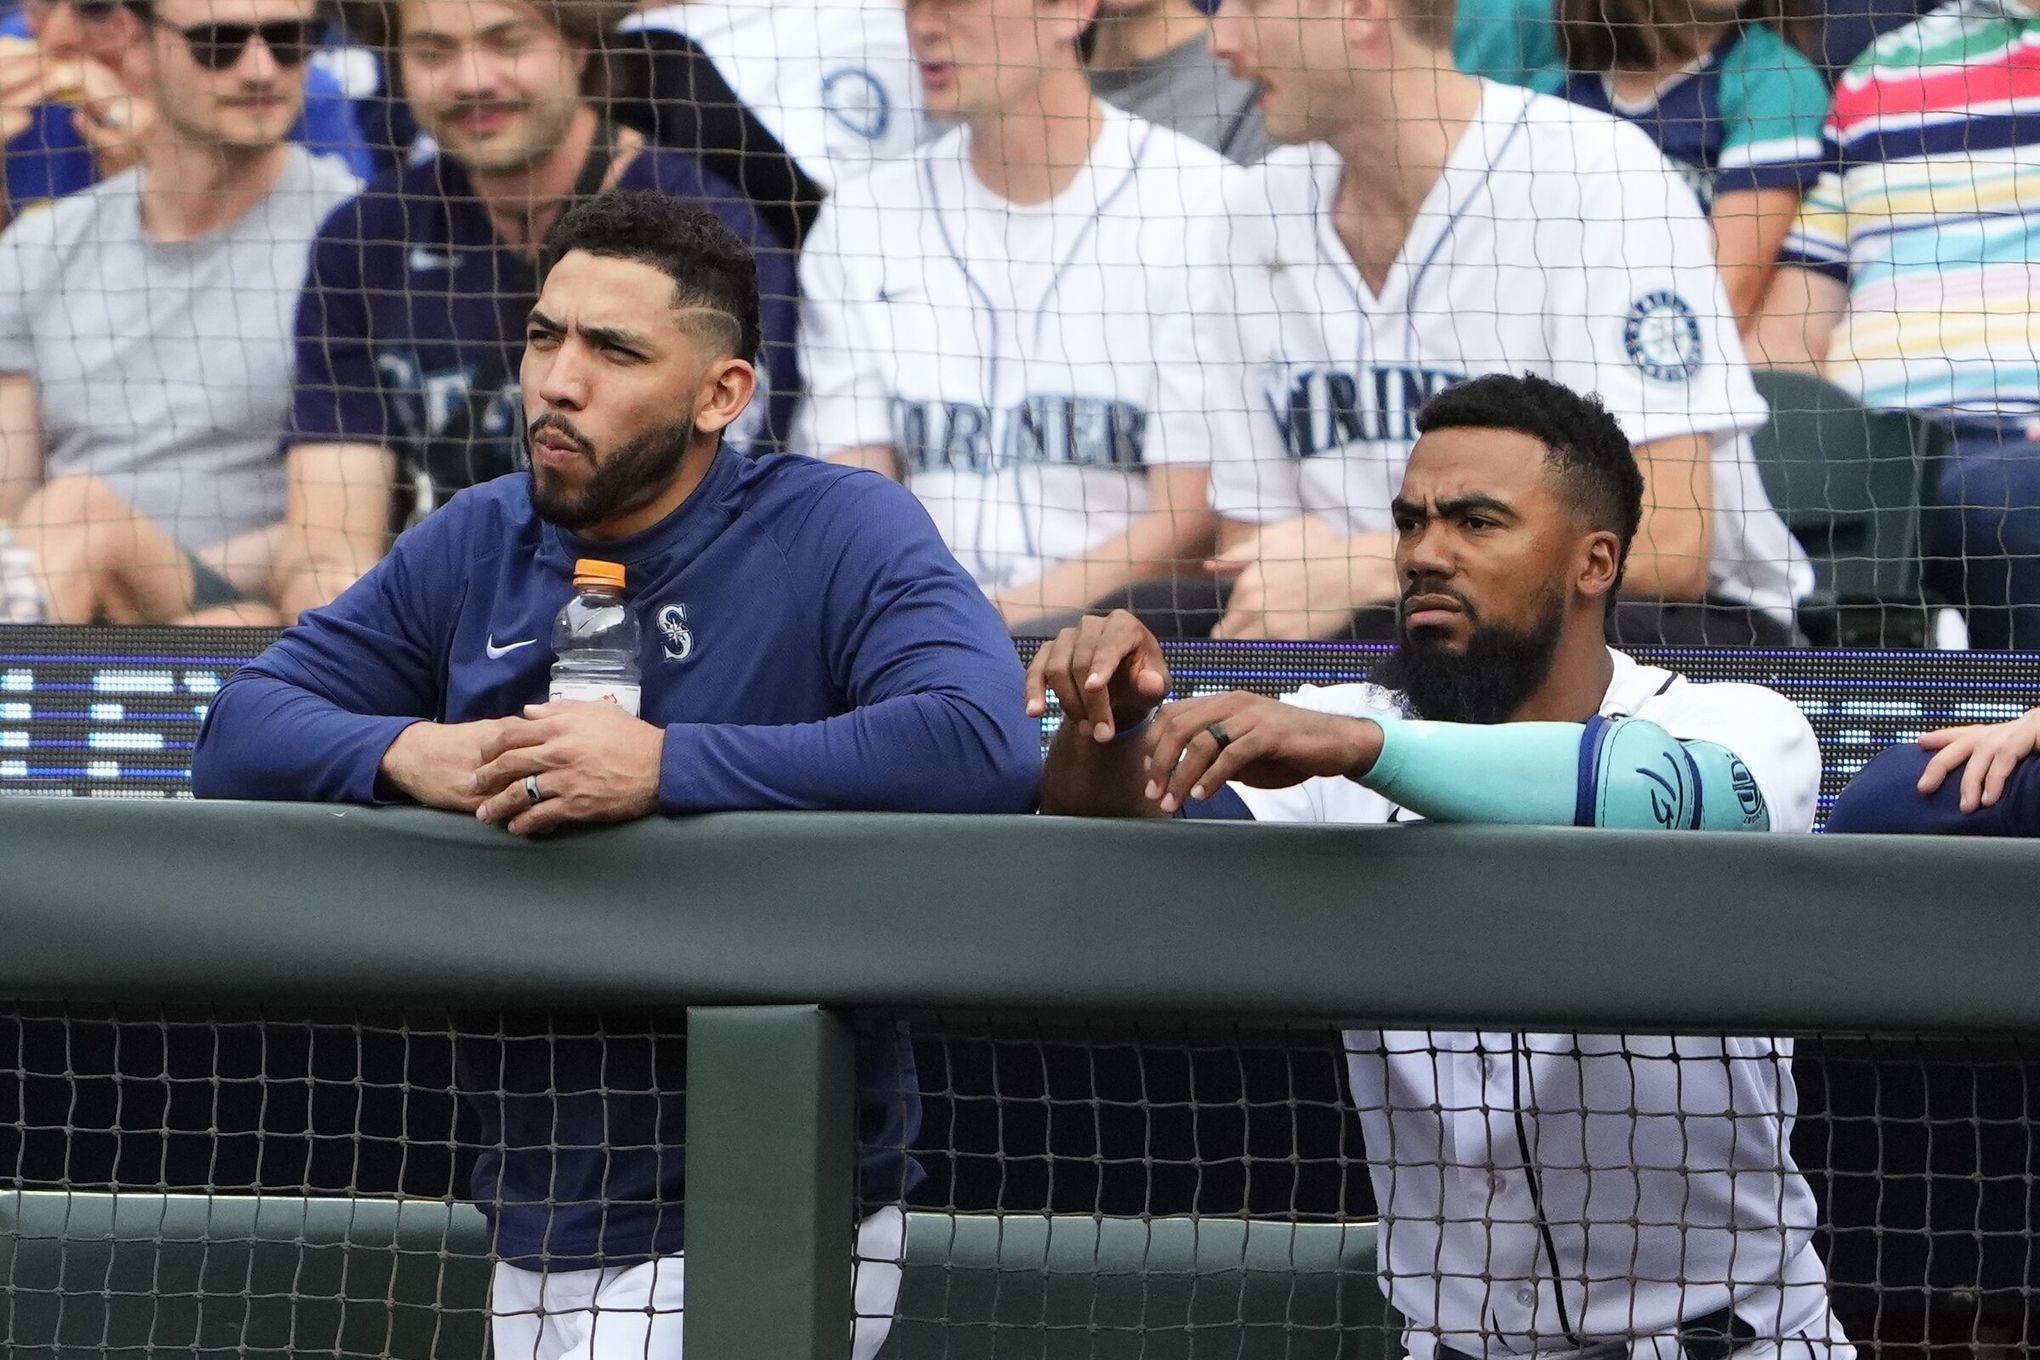 Why fans dislike this Mariners team so much